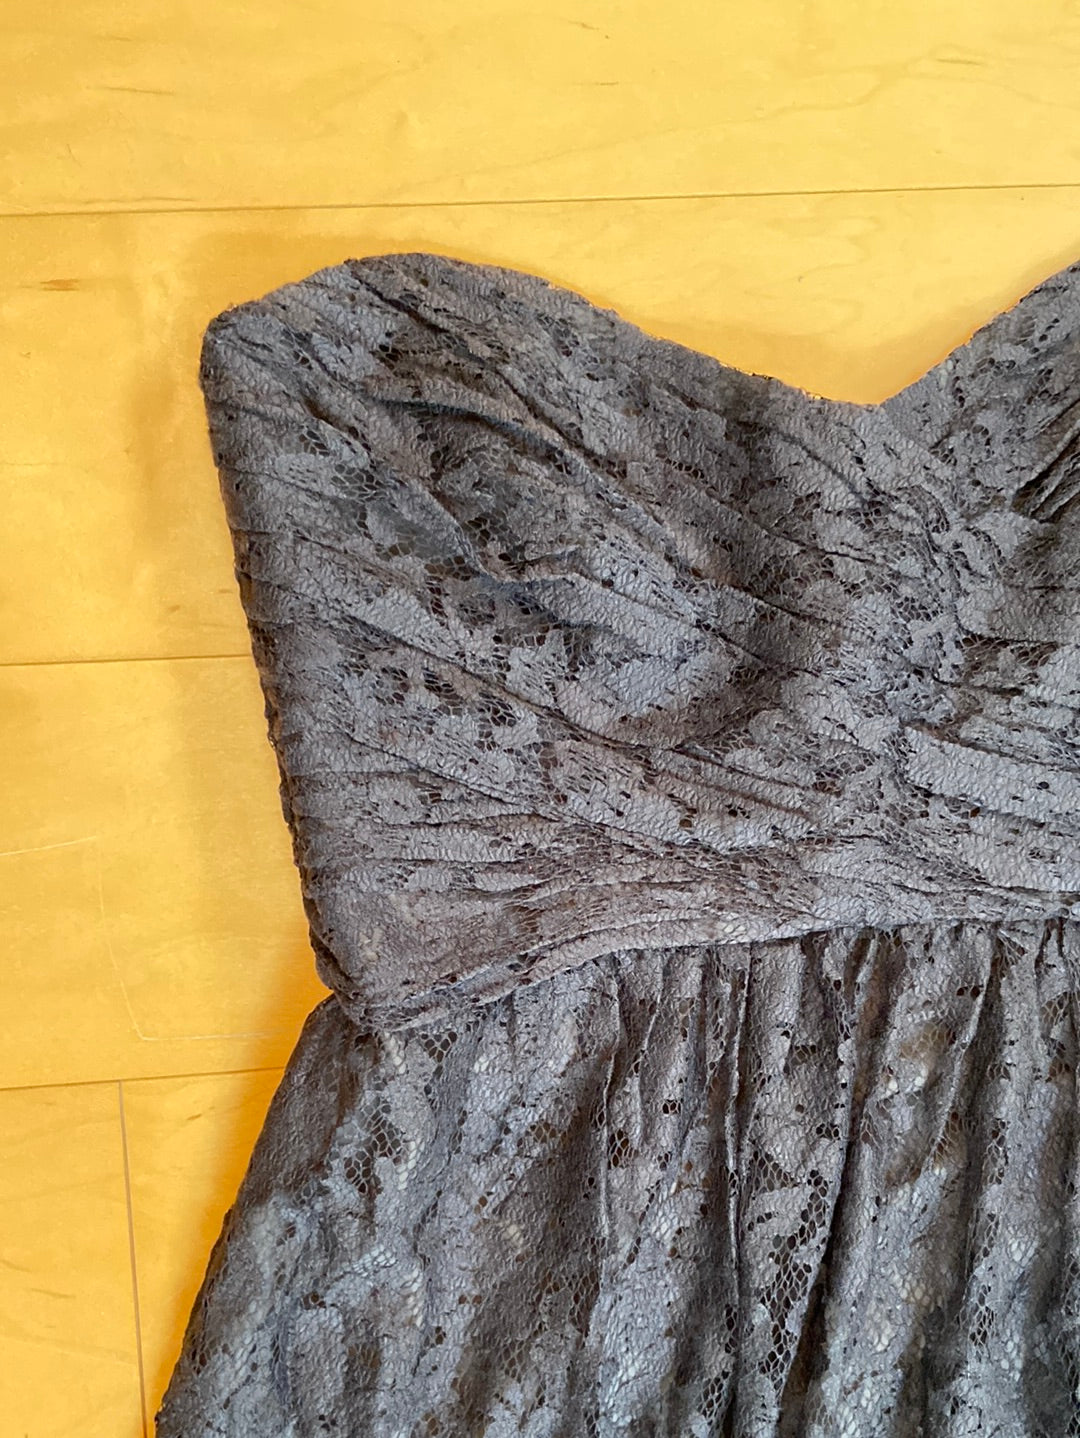 GRAY GOWN Amsale Size 12